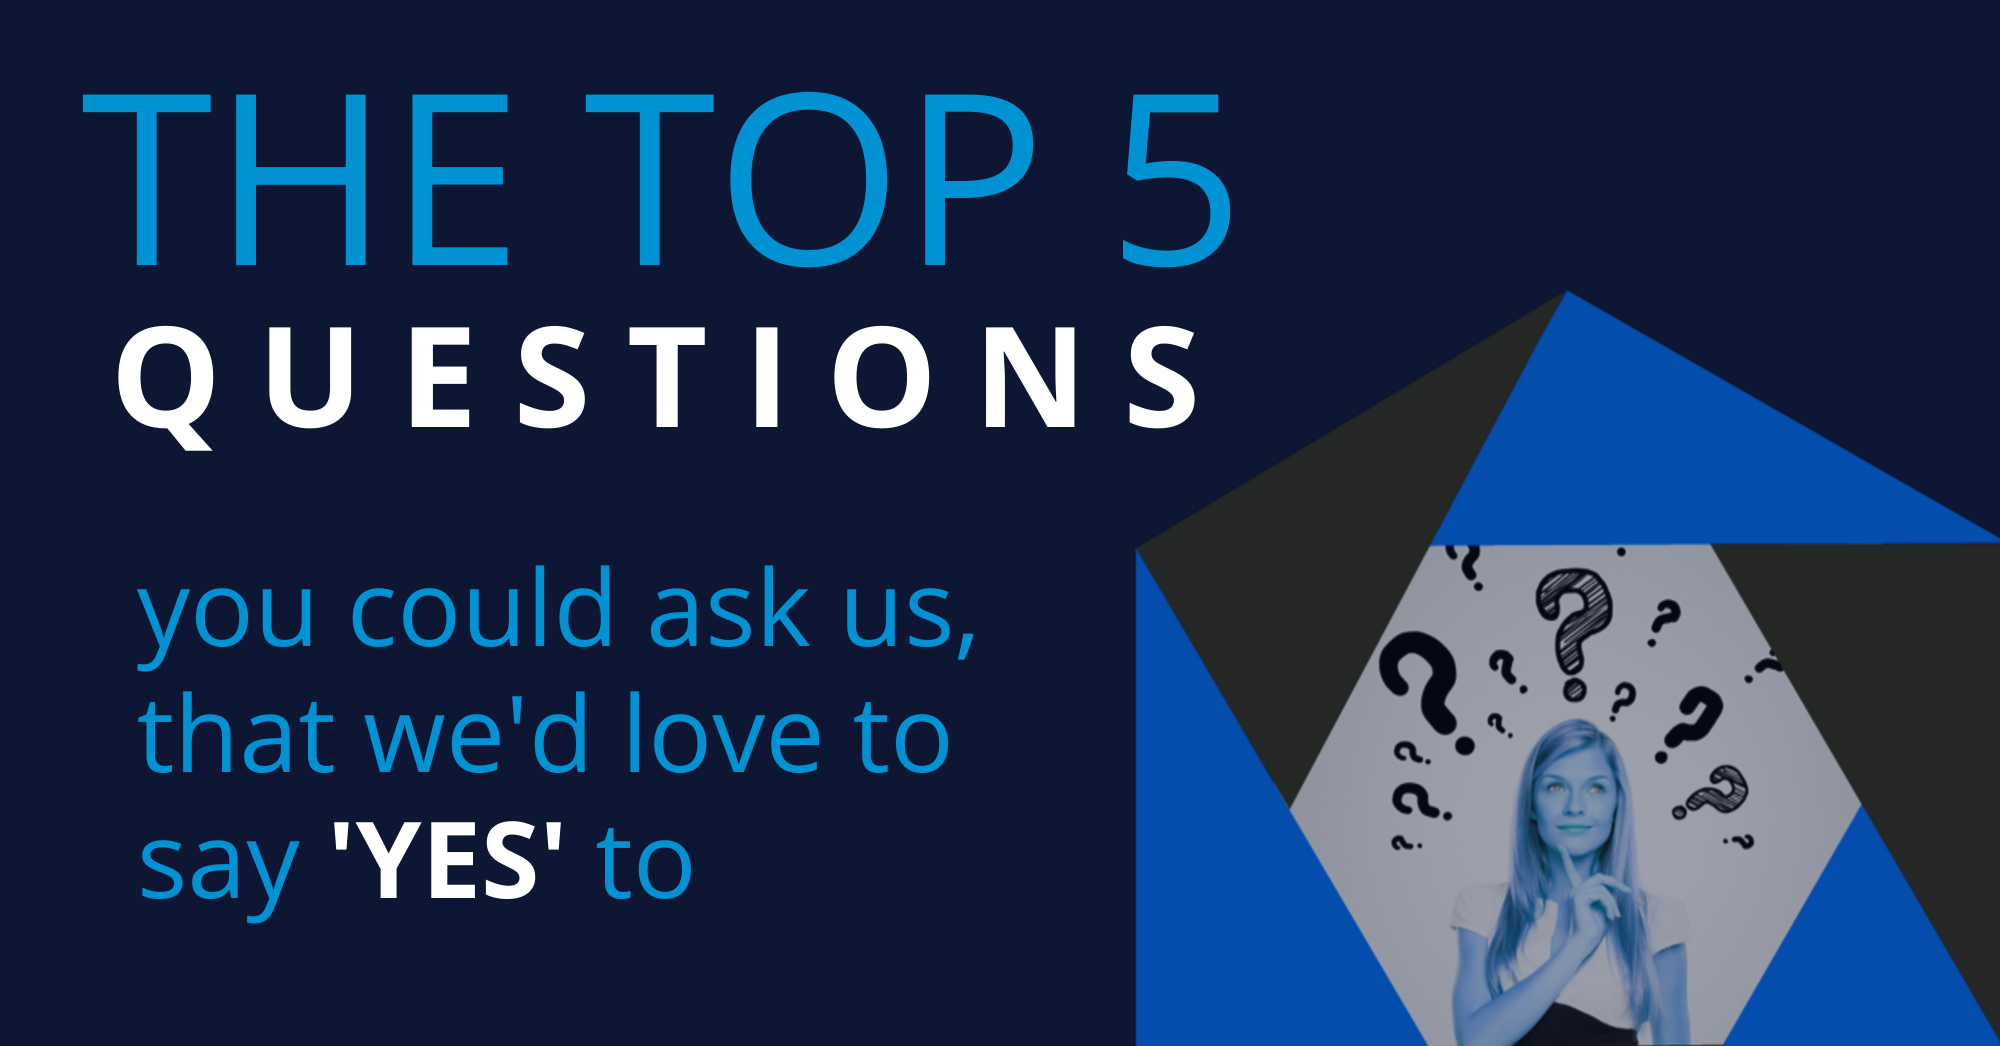 The Top 5 Questions you could ask us, that we would love to say YES to.